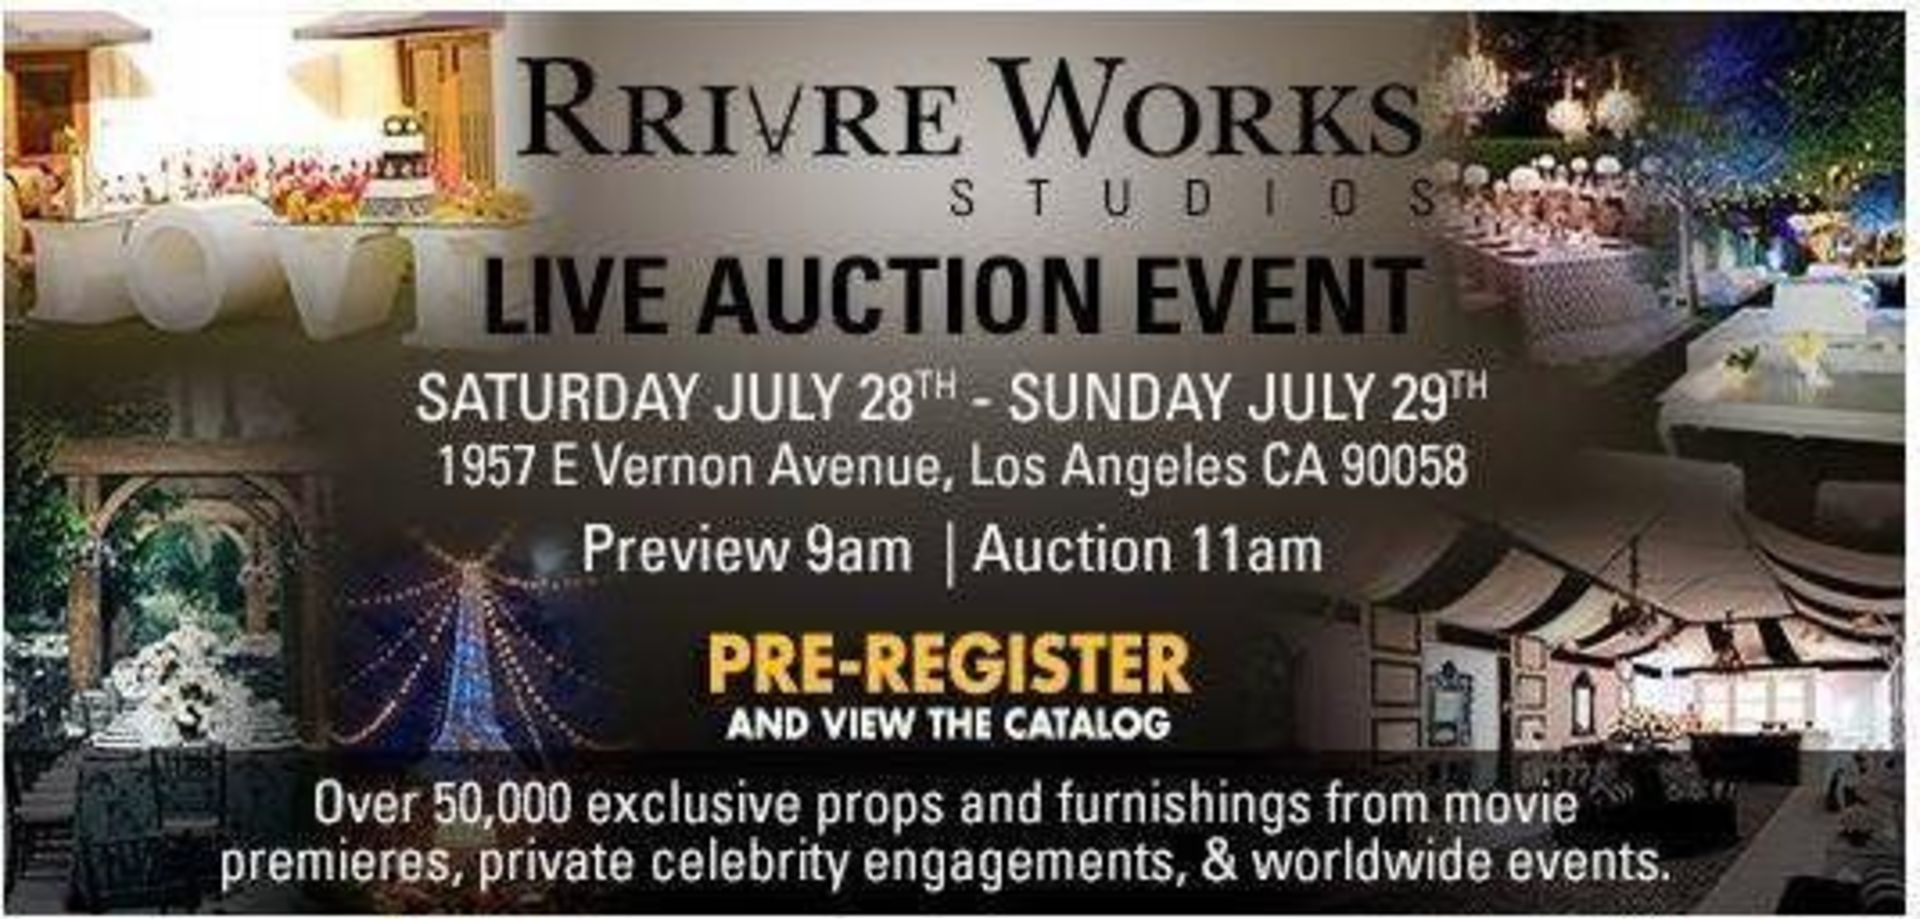 PREMIERE PROPS TO AUCTION OFF OVER 50,000 PIECES OF EXCLUSIVE PROPS AND FURNISHINGS FROM ICONIC